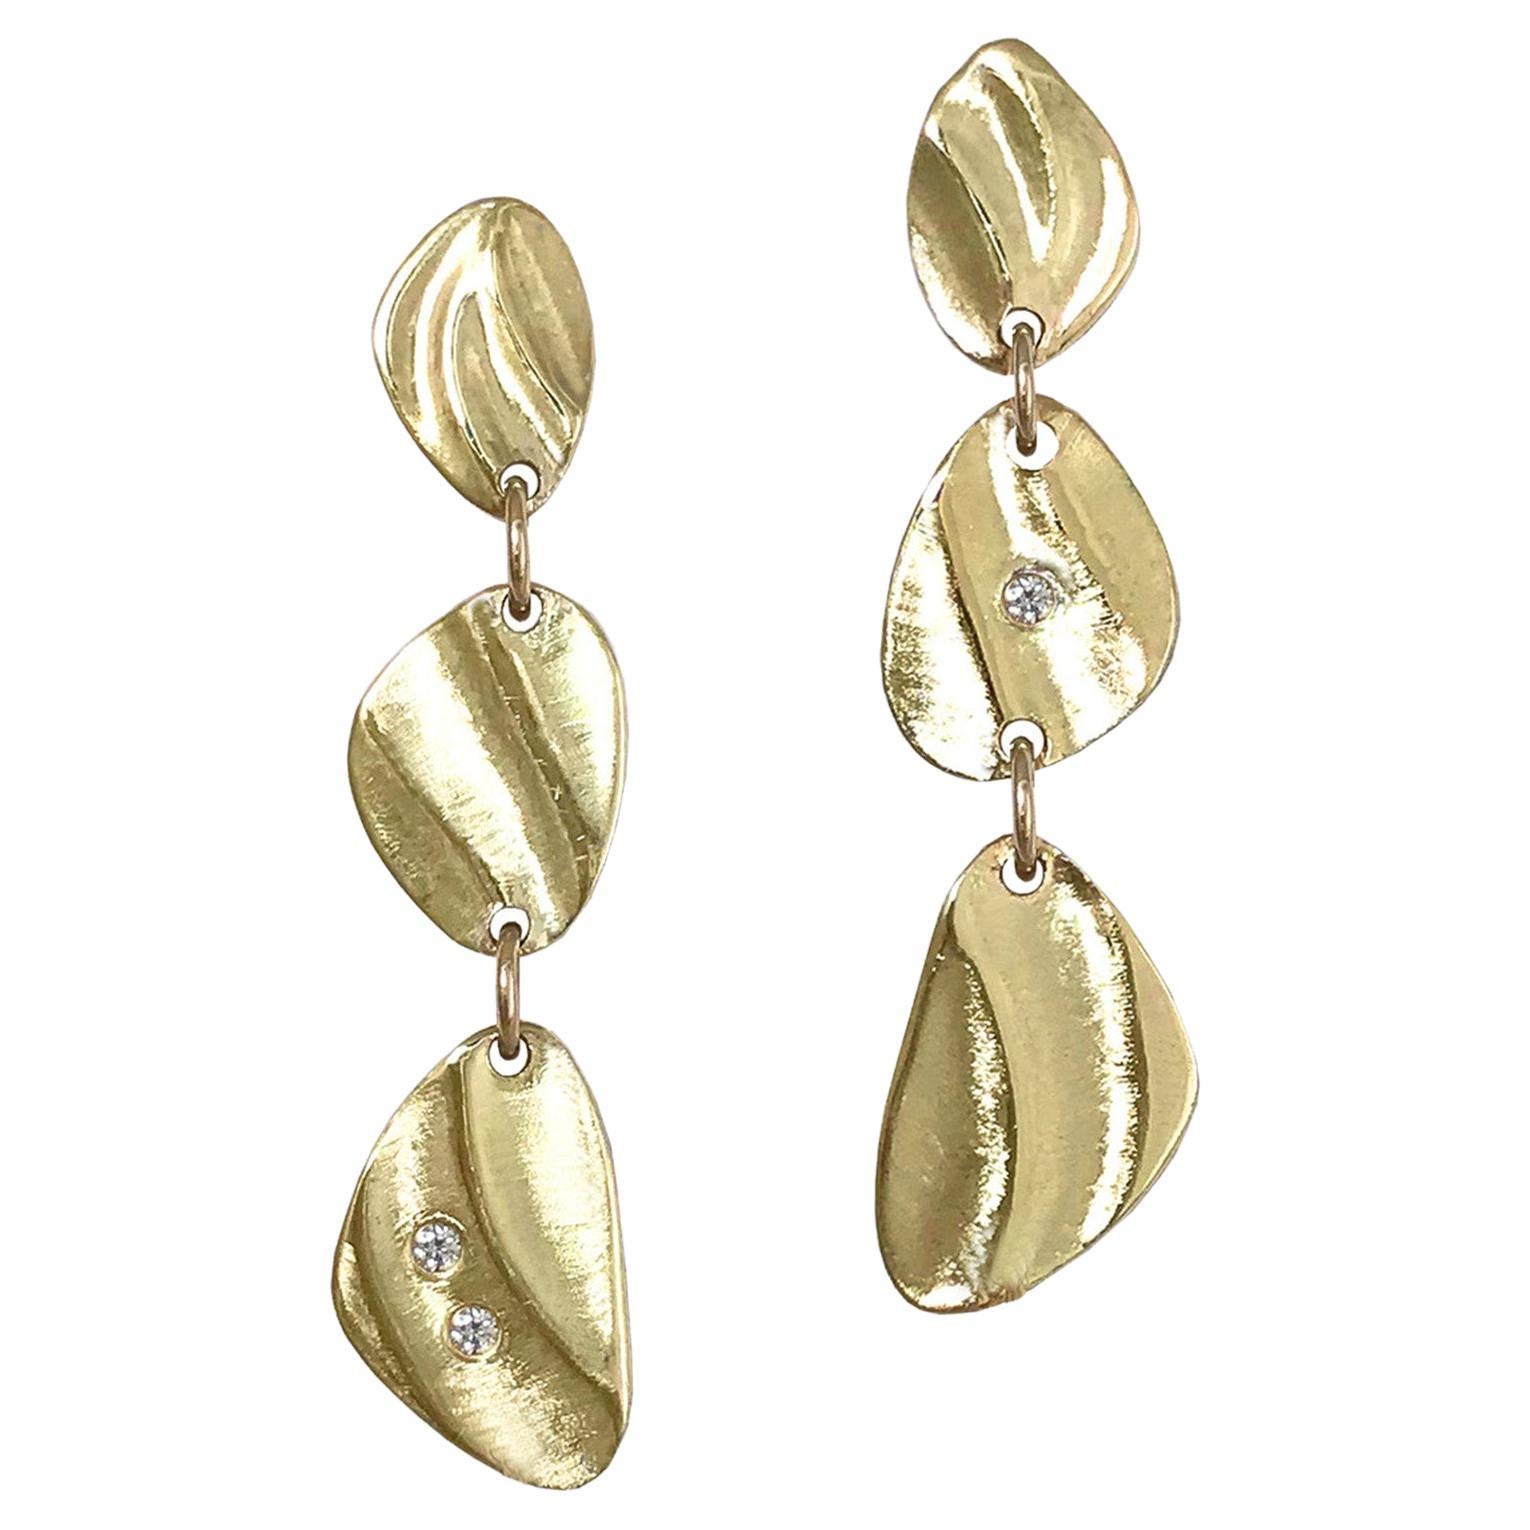 14 Karat Gold Mini Pebble Dangle Earrings with Diamond Accents from K.Mita For Sale